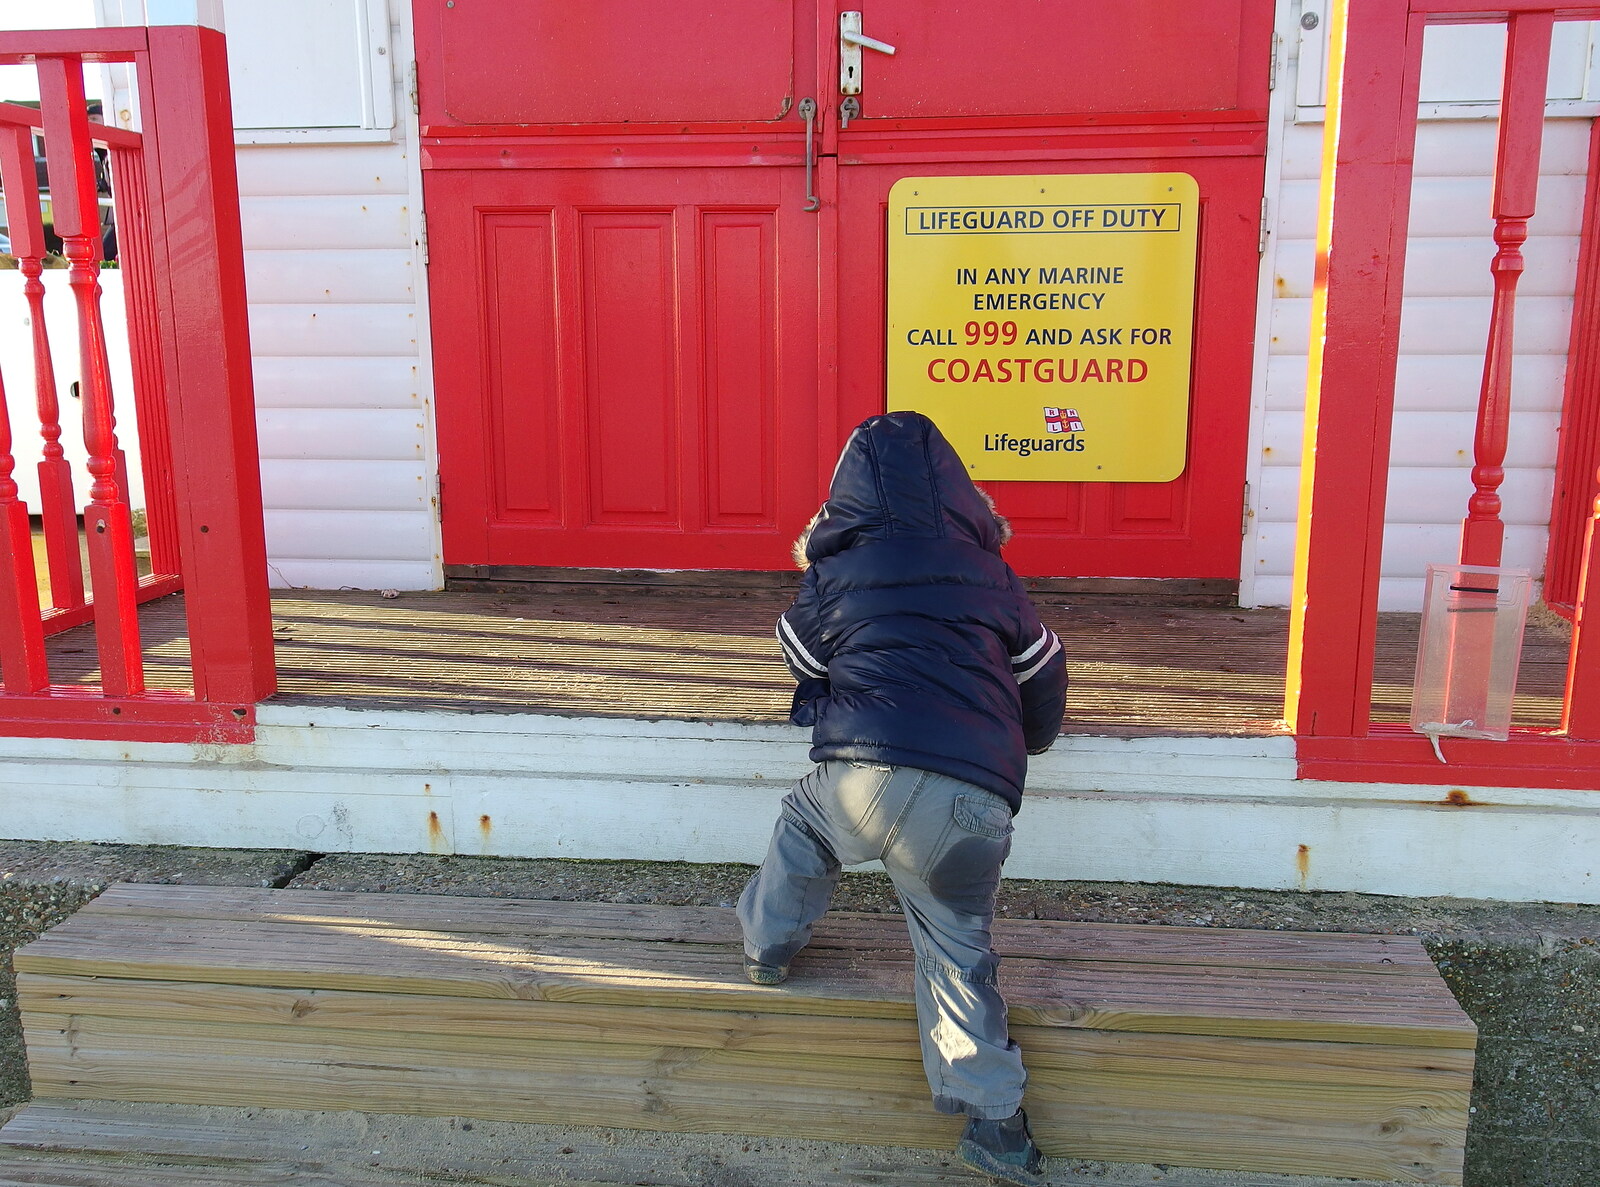 Harry climbs up to the coastguard hut from Post-Christmas Southwold, Suffolk - 29th December 2013